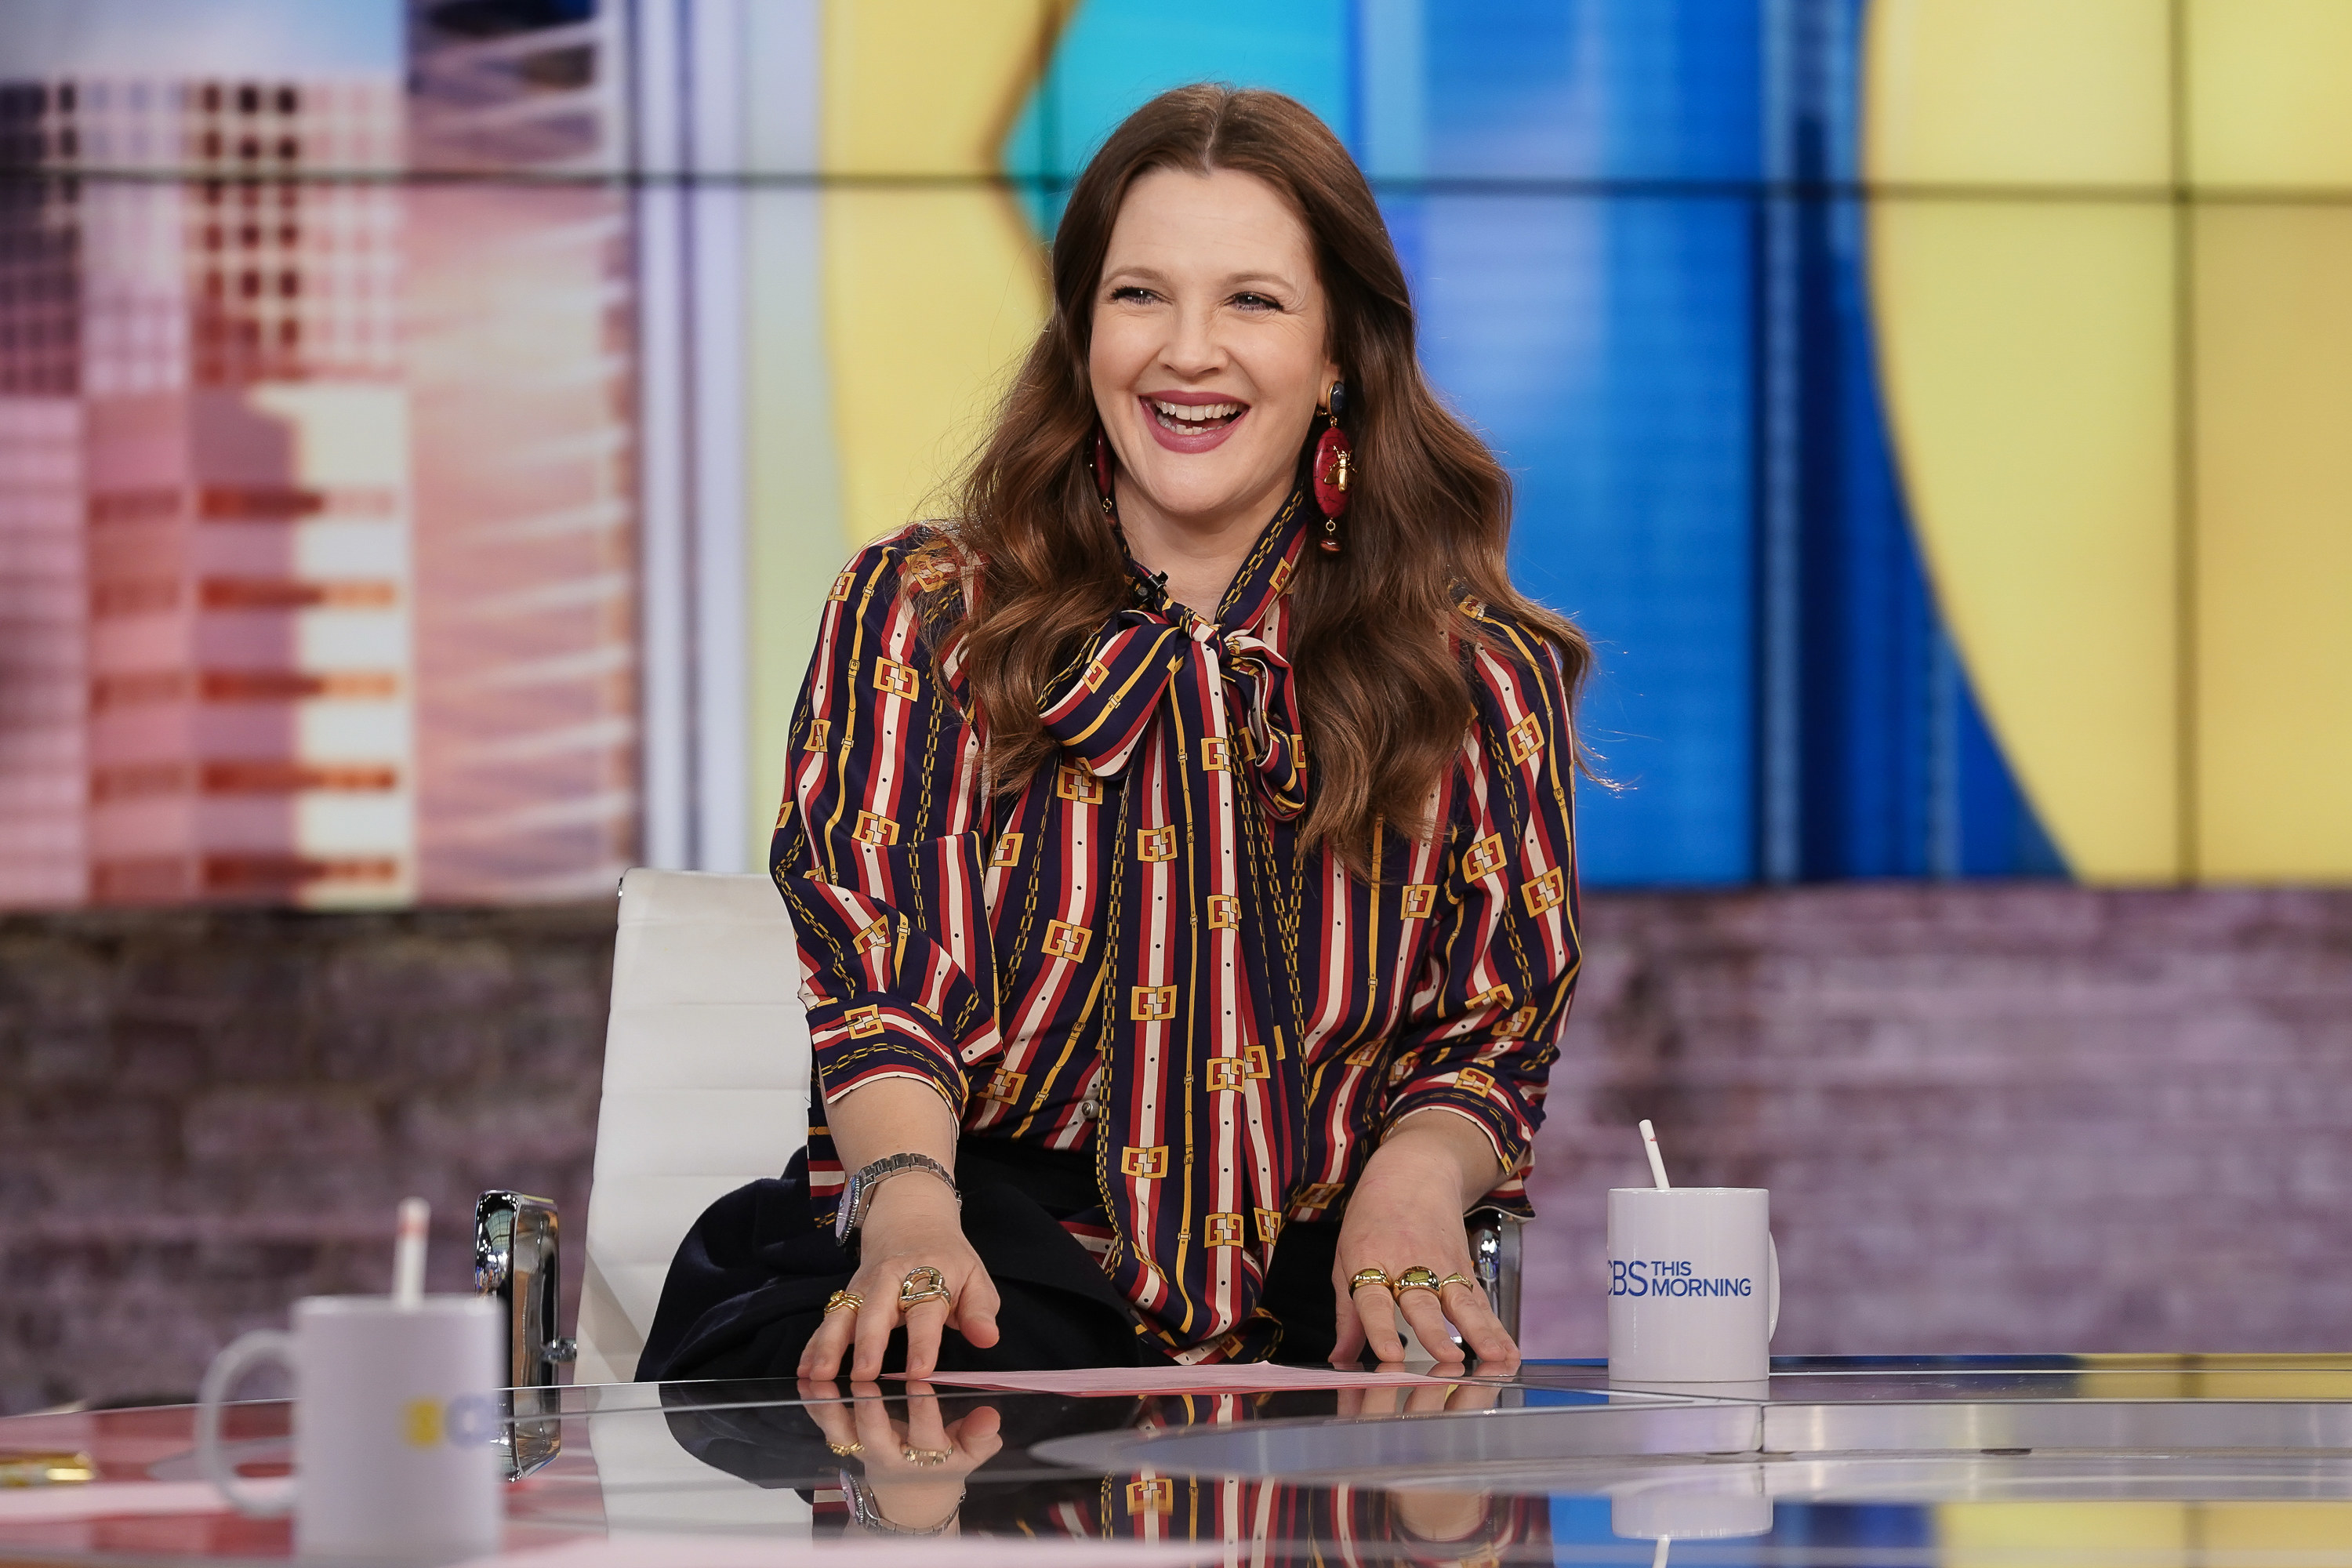 Drew Barrymore smiling on her talk show